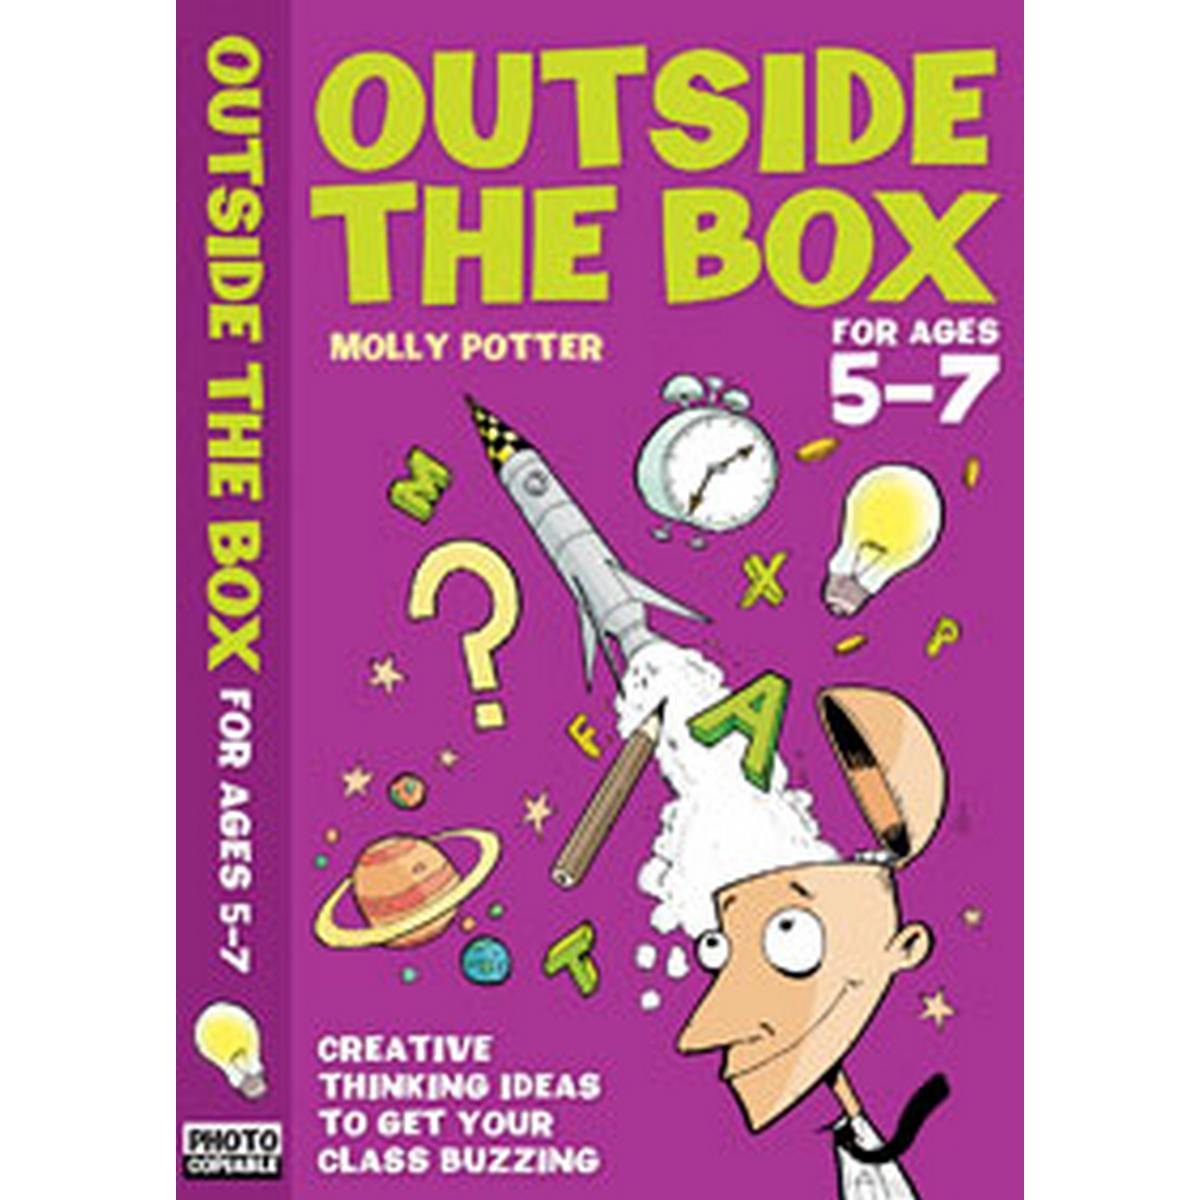 Outside the Box Ages 5-7 (Inspirational Ideas)